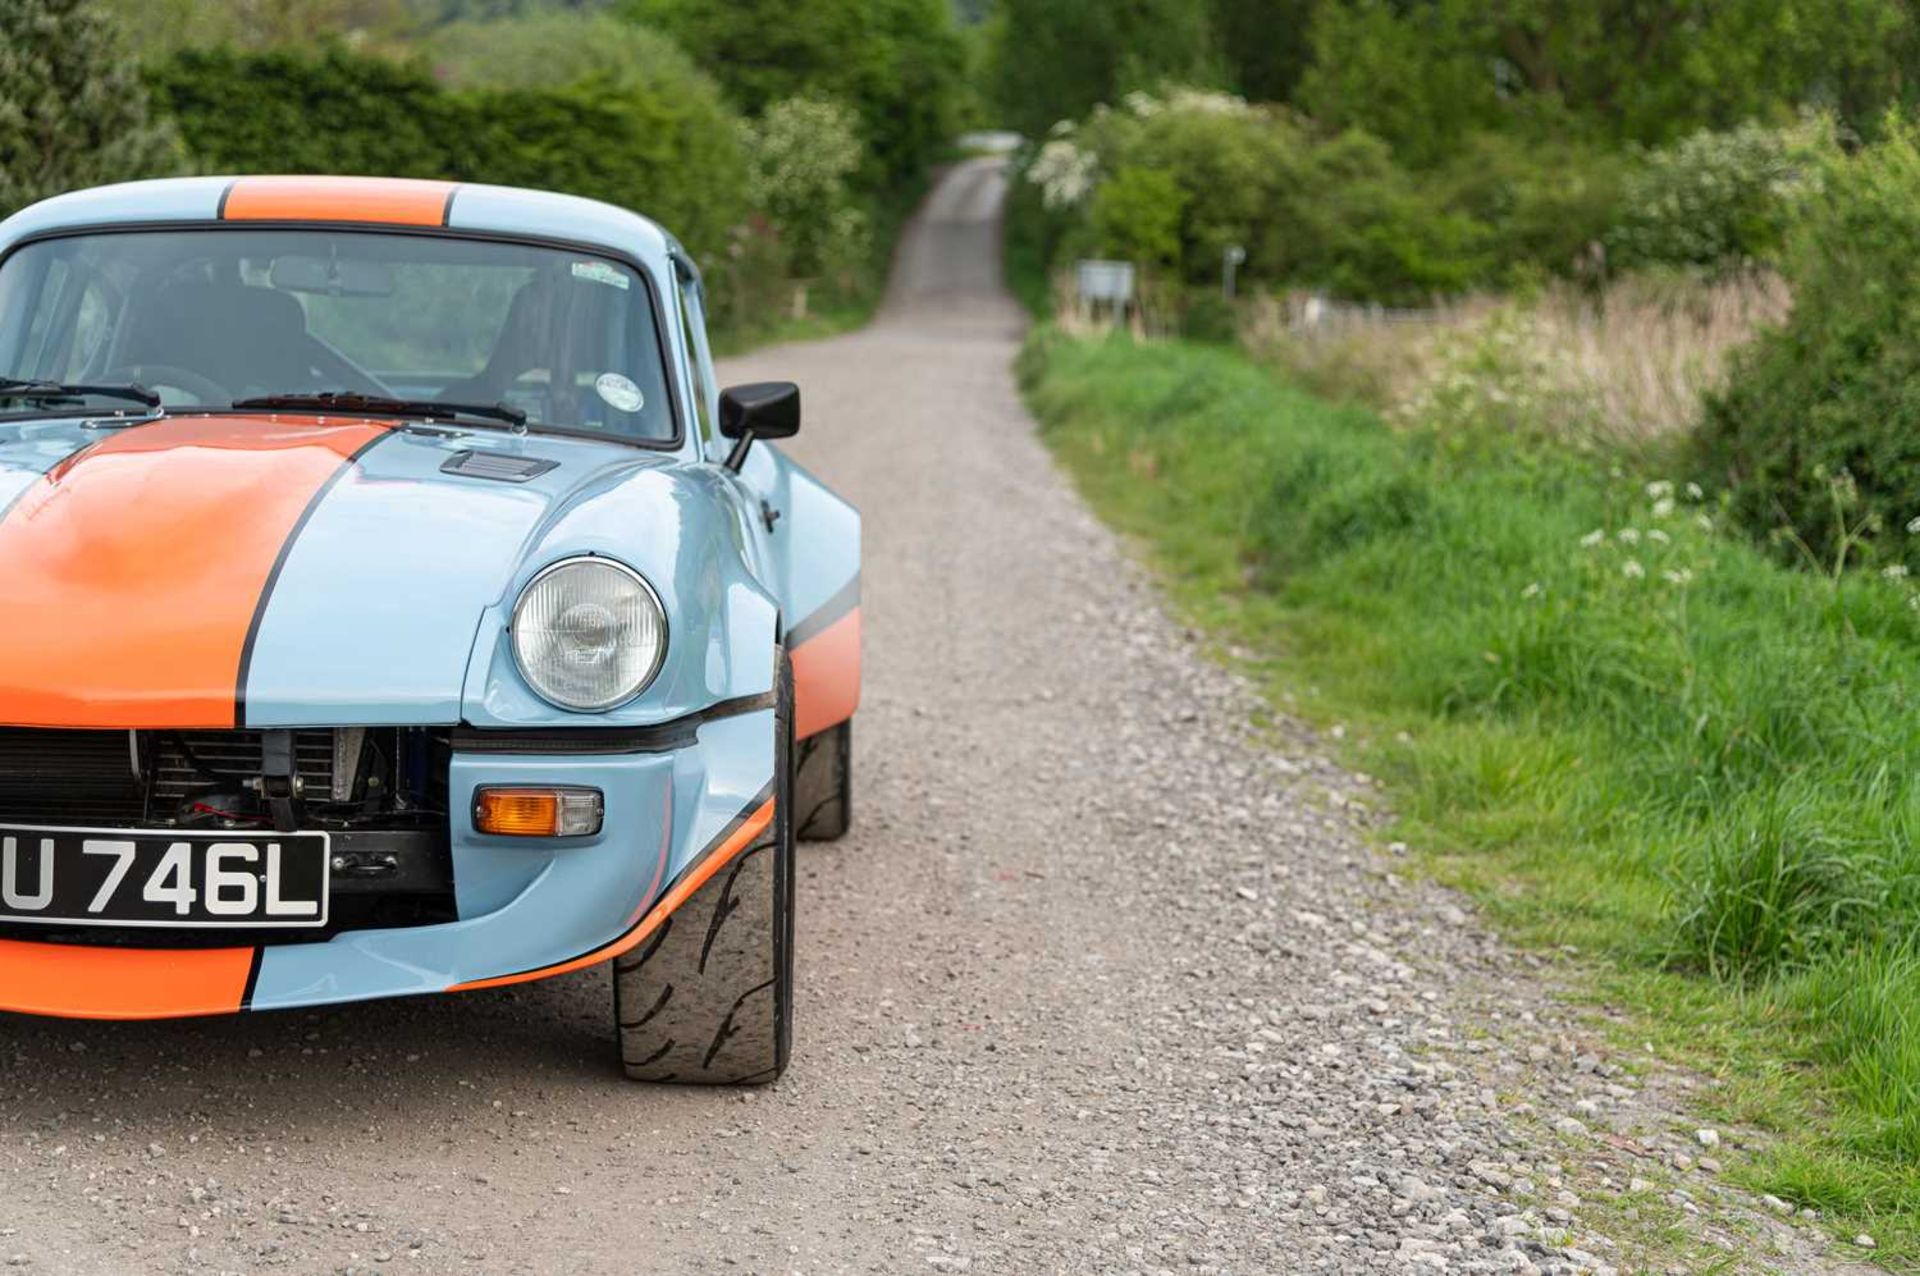 1973 Triumph GT6  ***NO RESERVE*** Presented in Gulf Racing-inspired paintwork, road-going track wea - Bild 5 aus 65